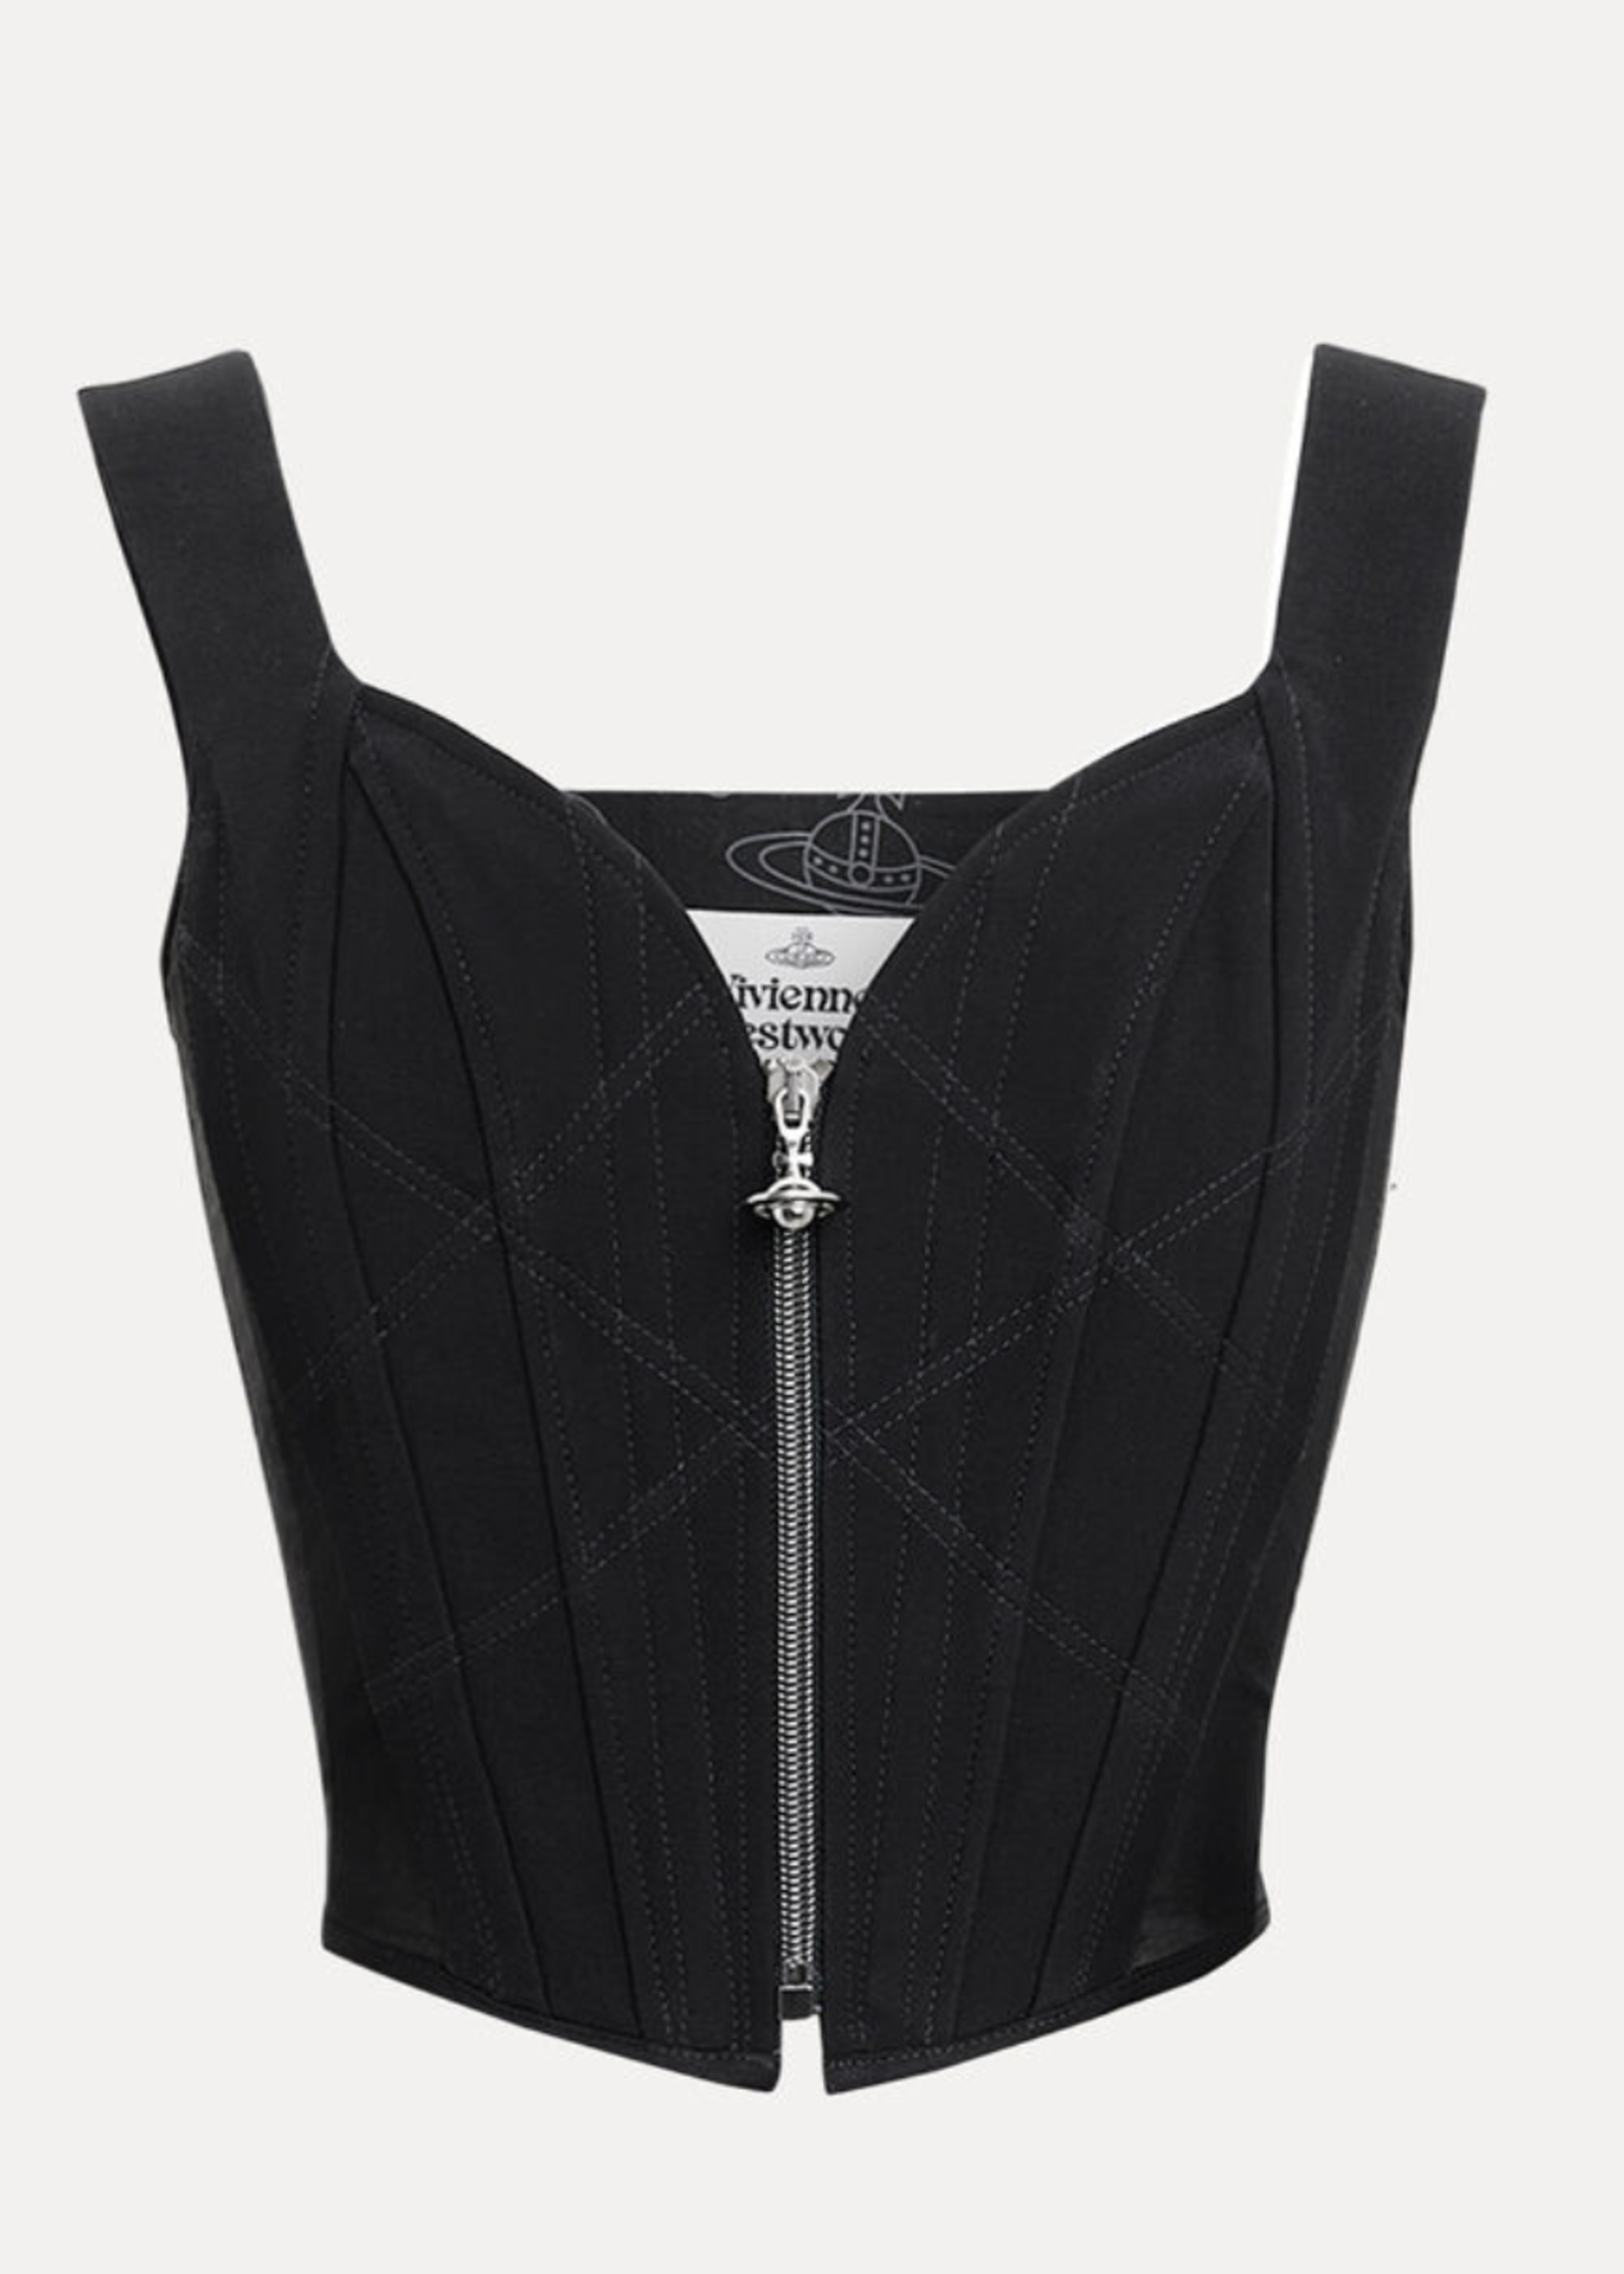 VIVIENNE WESTWOOD Classic Corset with Zip Front in Black